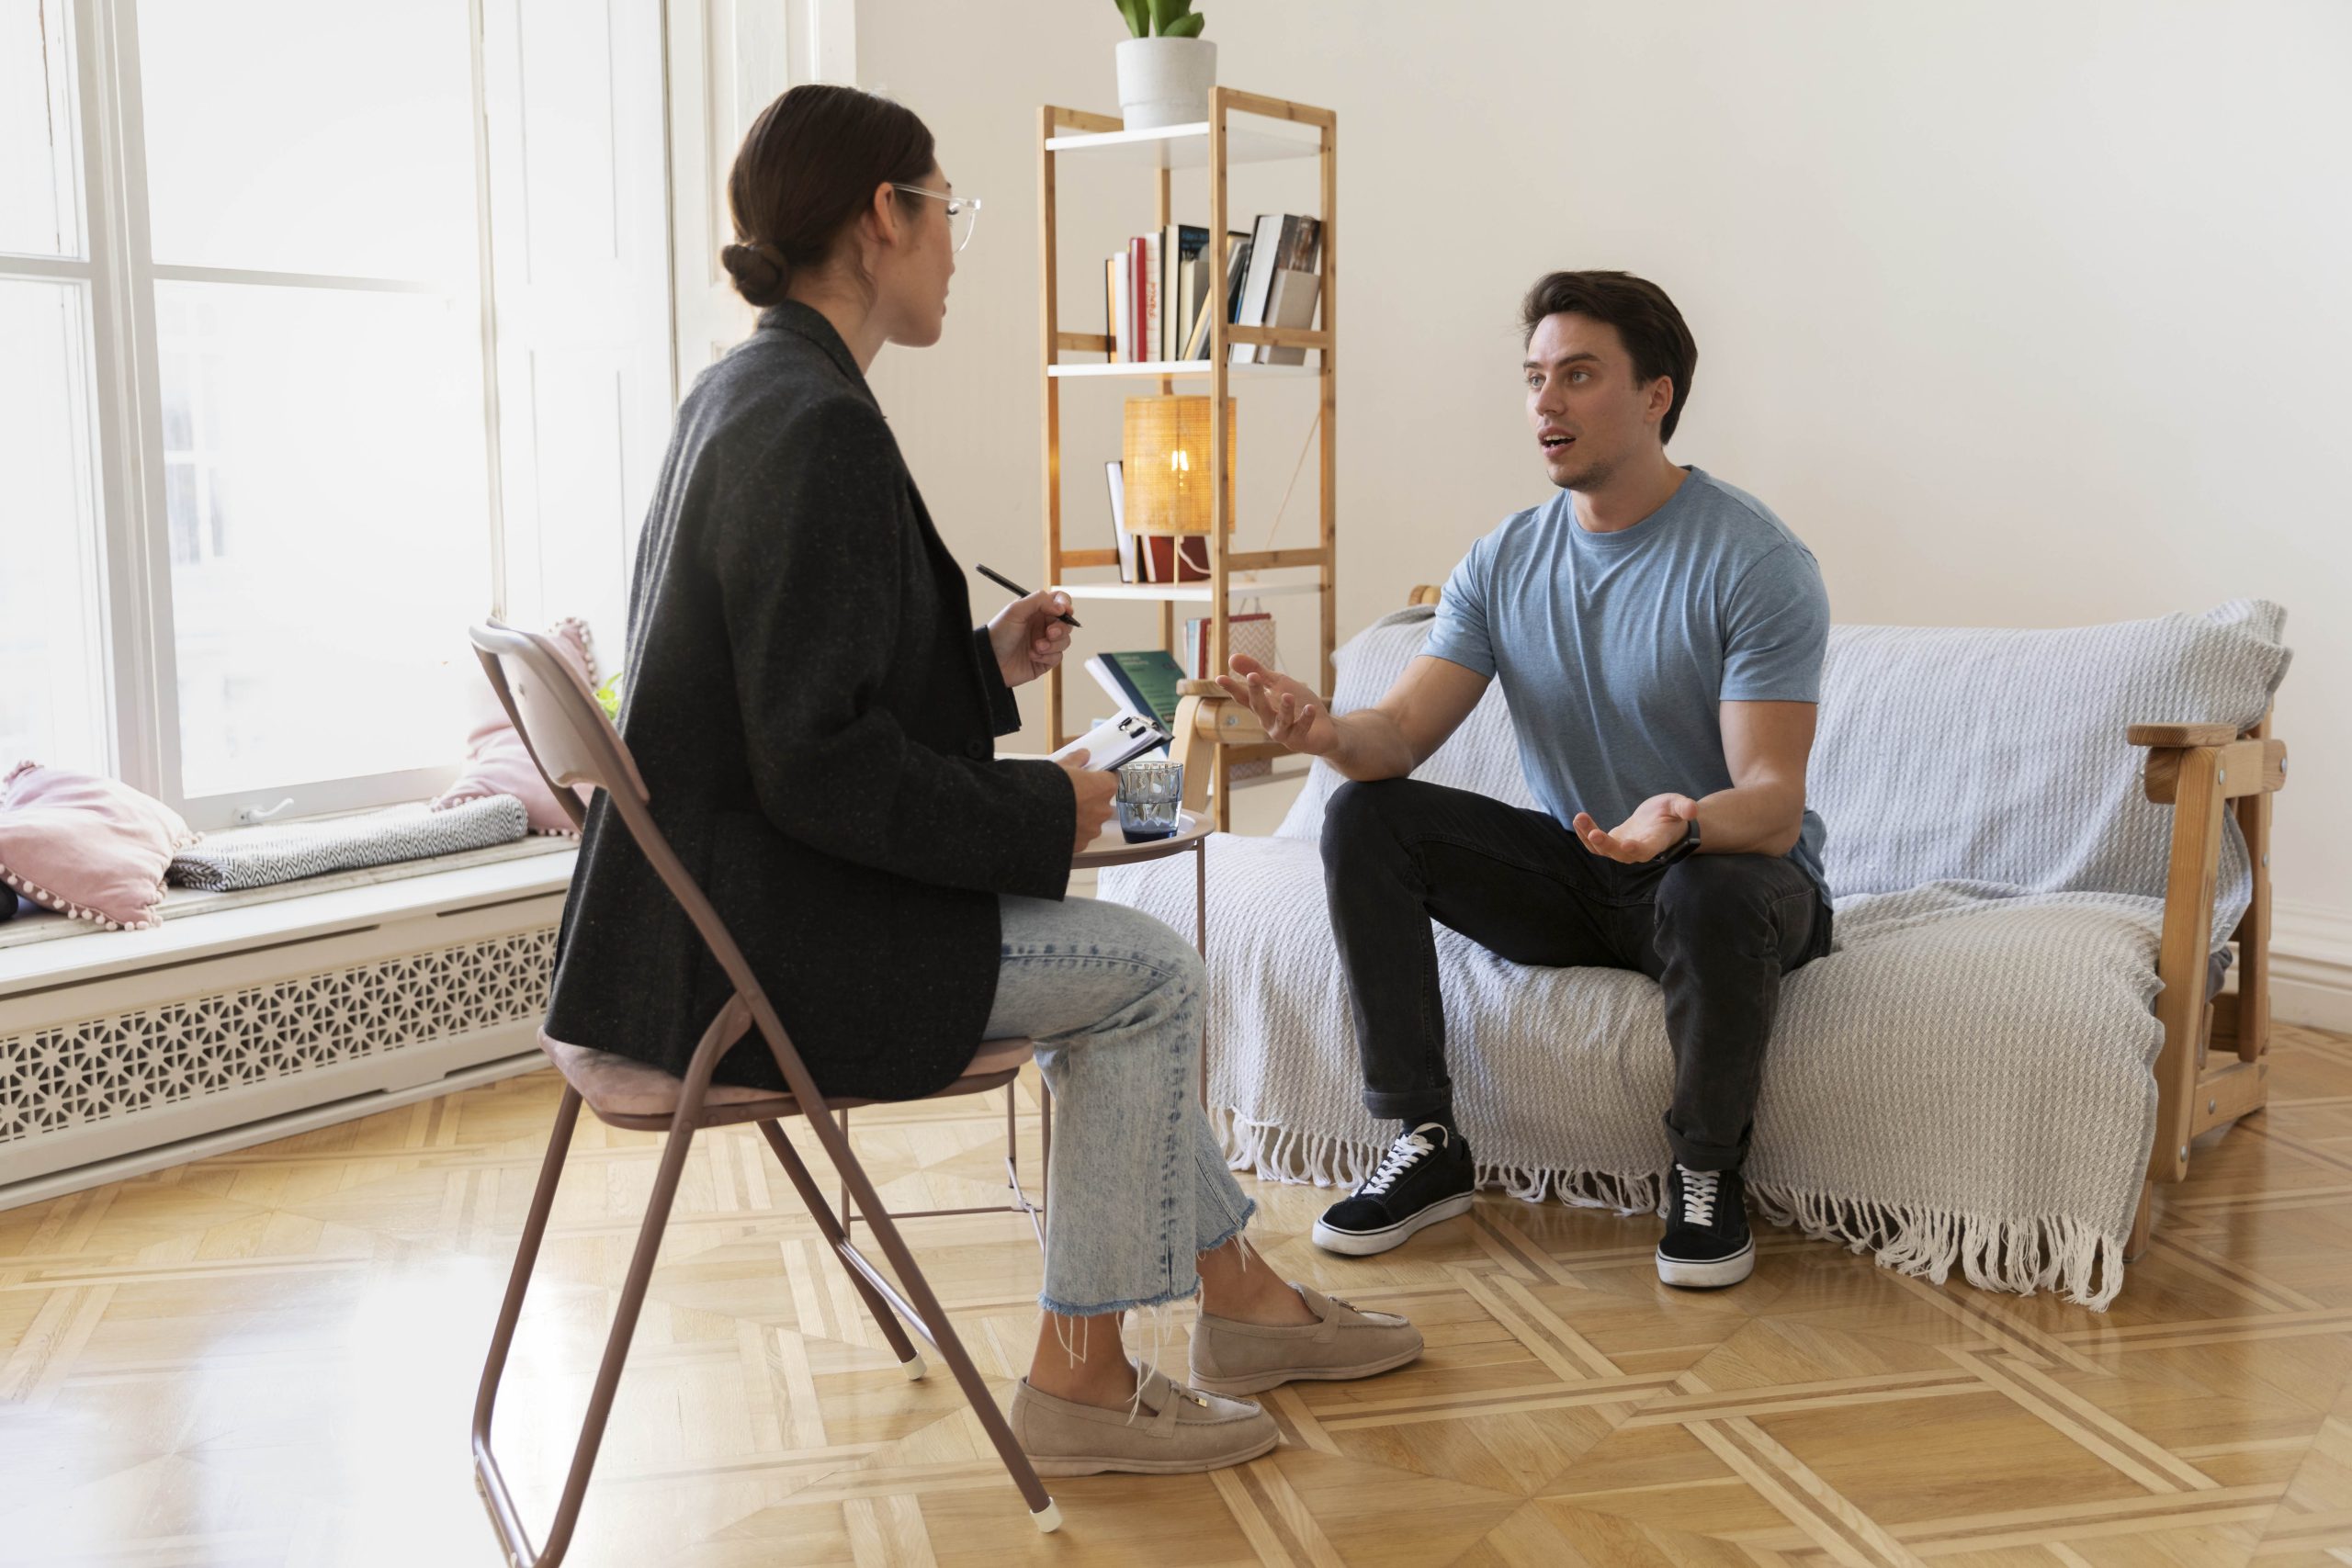 A client sitting on a sofa opposite to the therapist who is sitting in a chair. The client asks questions to determine the right Therapist for their needs.